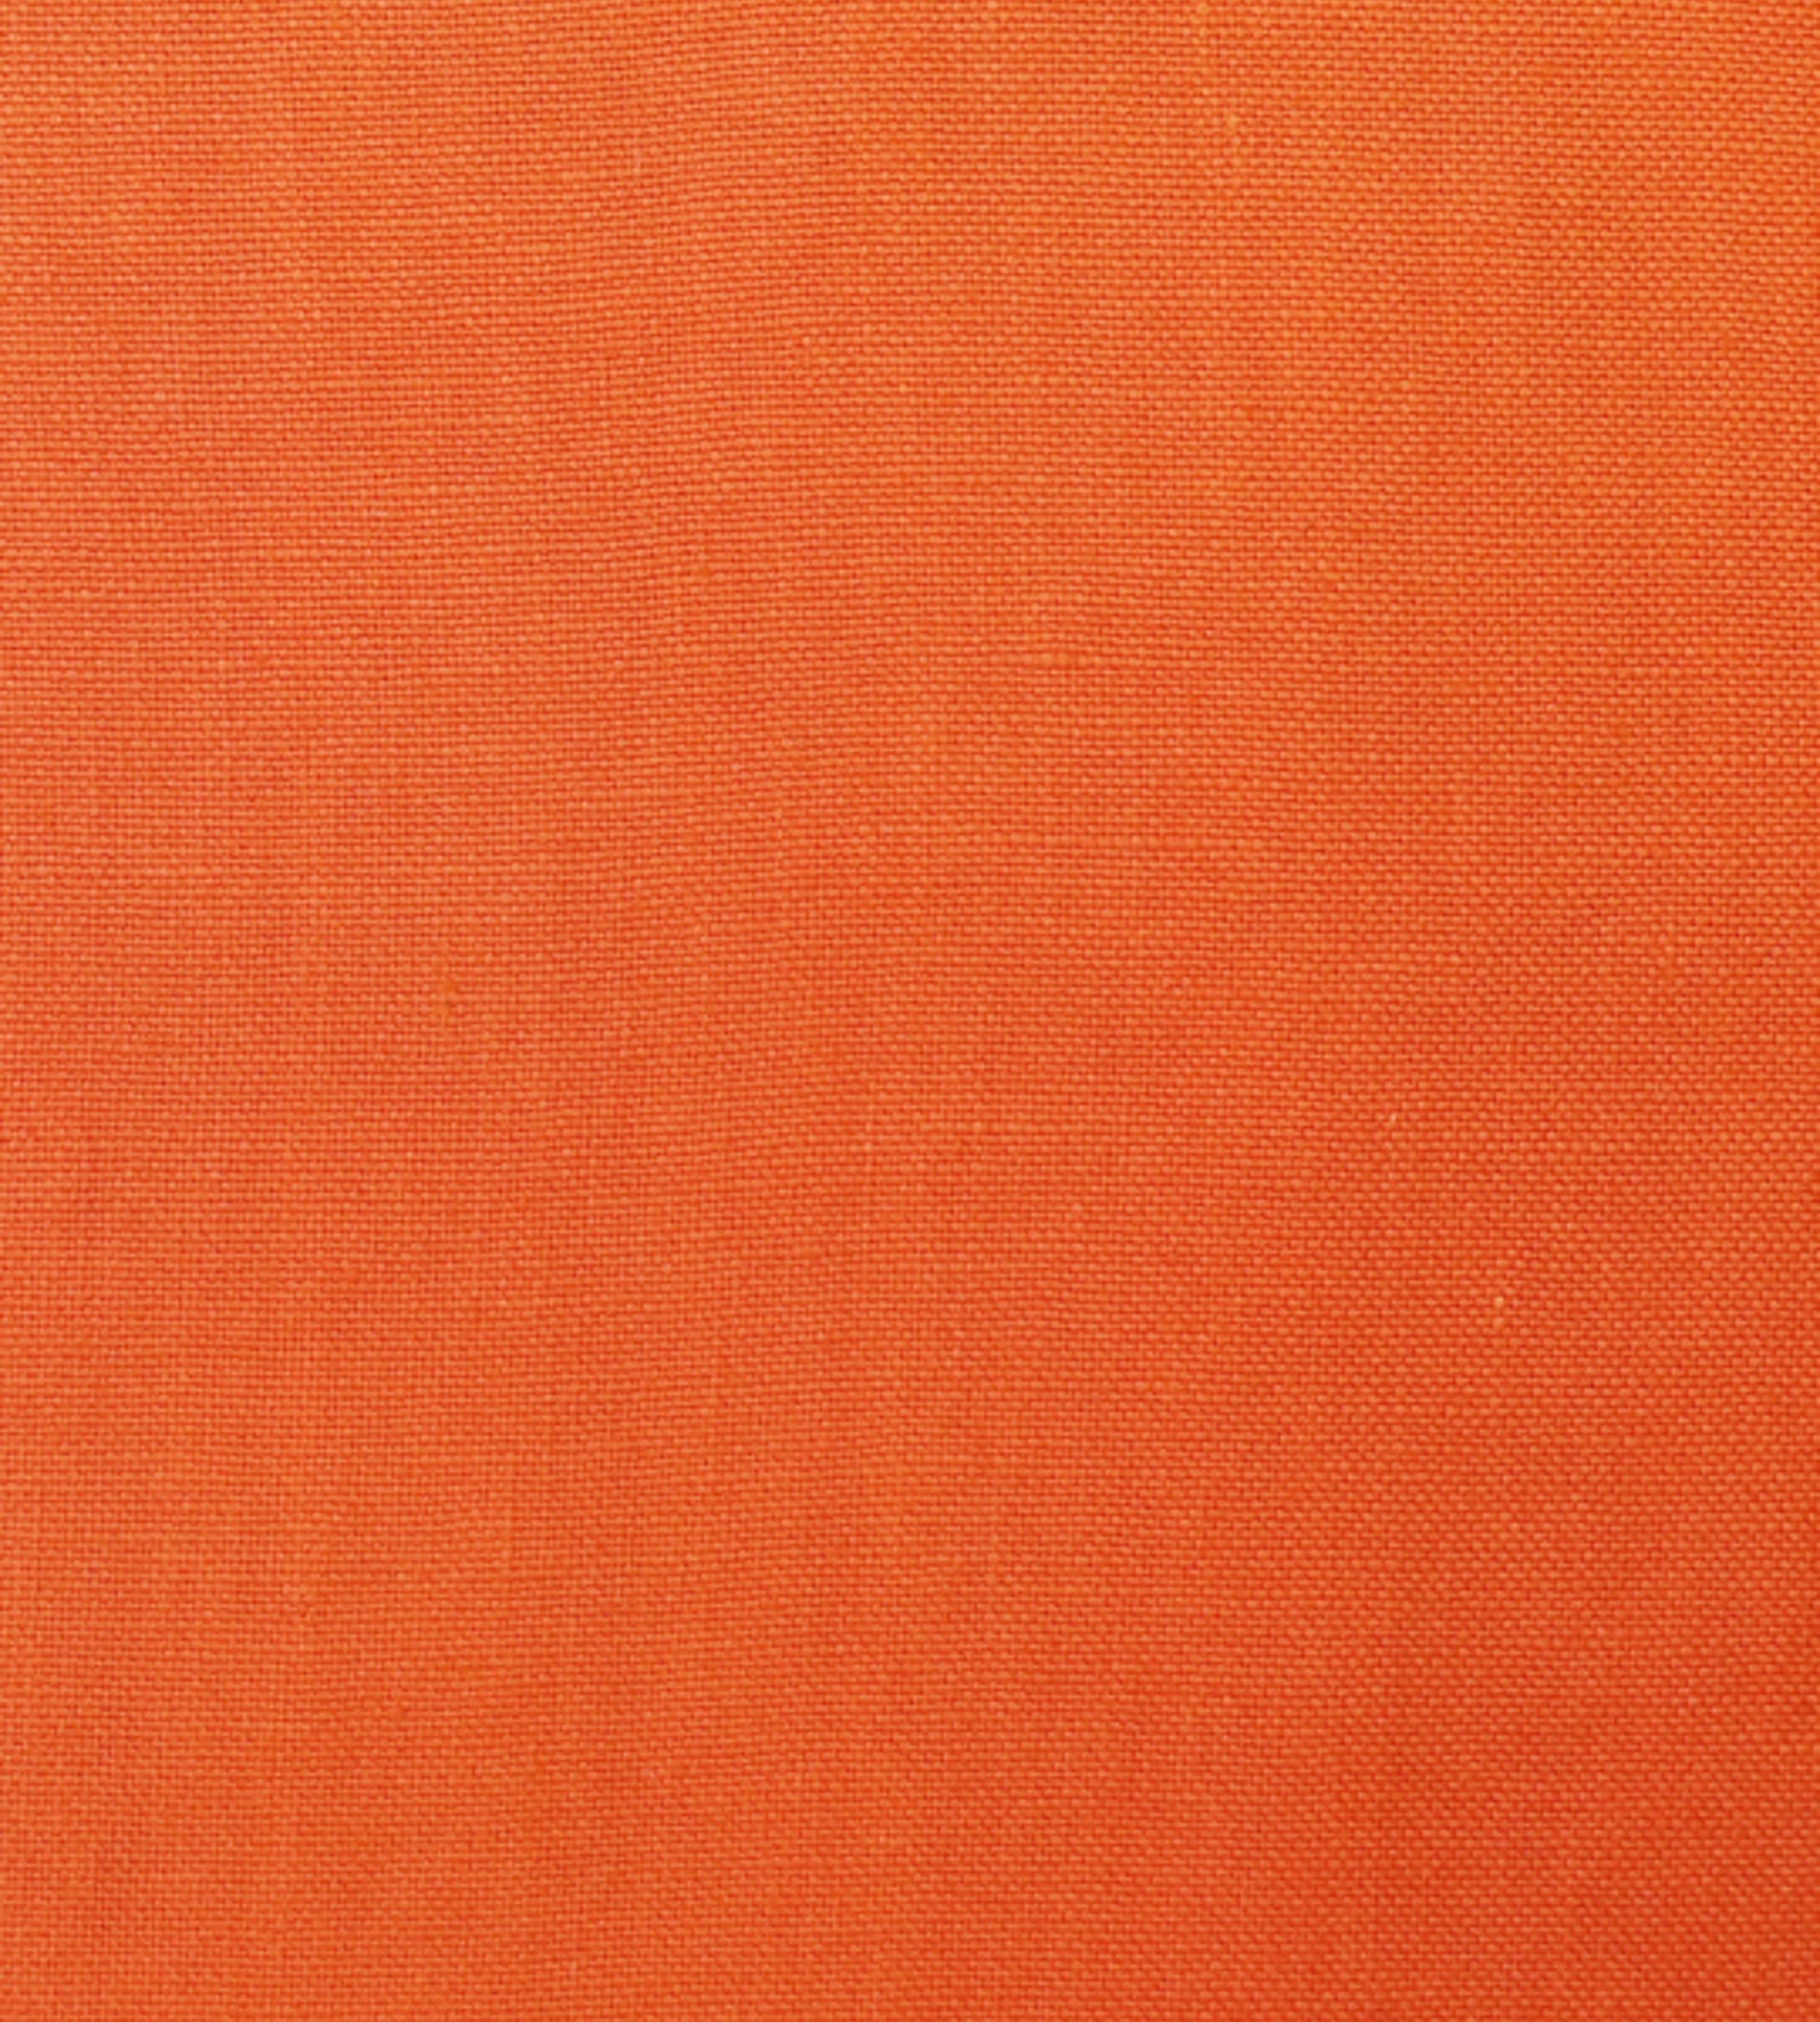 Purchase Scalamandre Fabric Pattern number SC 002527108, Toscana Linen Clementine 1